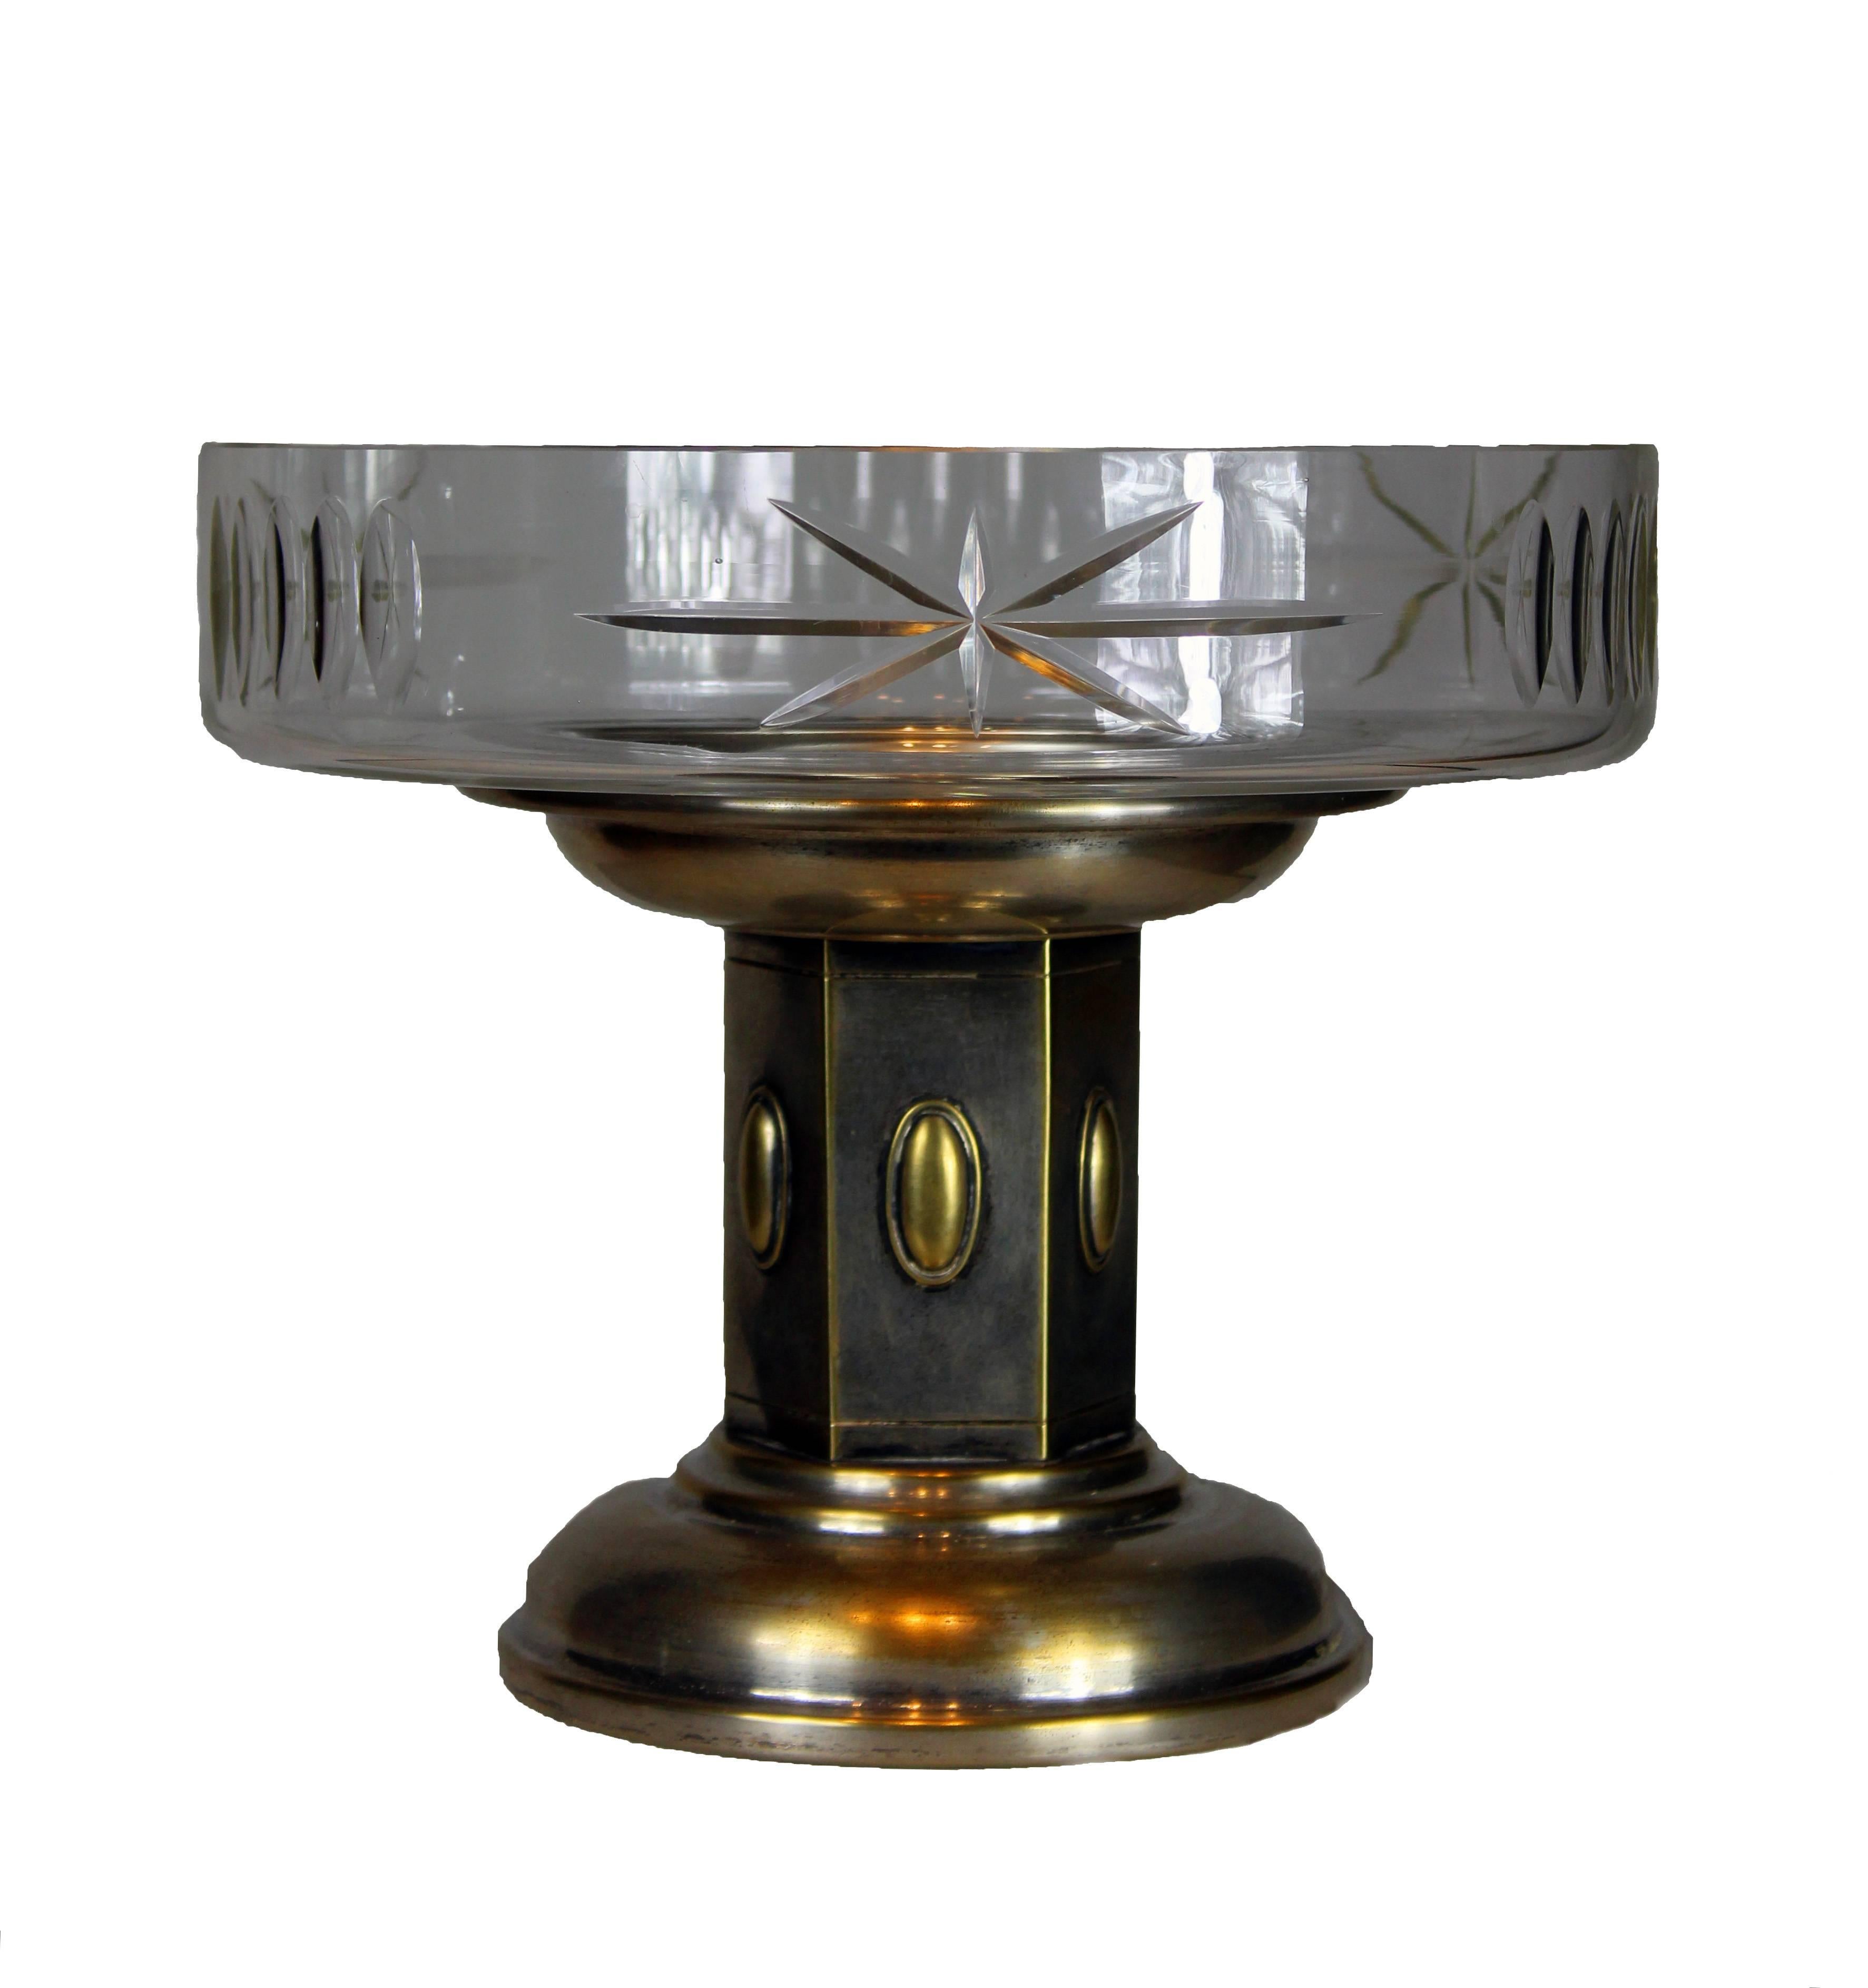 Mid-20th Century Italian Crystal Centrepiece Fruit Bowl Art Deco with Brass Decorations, 1930s